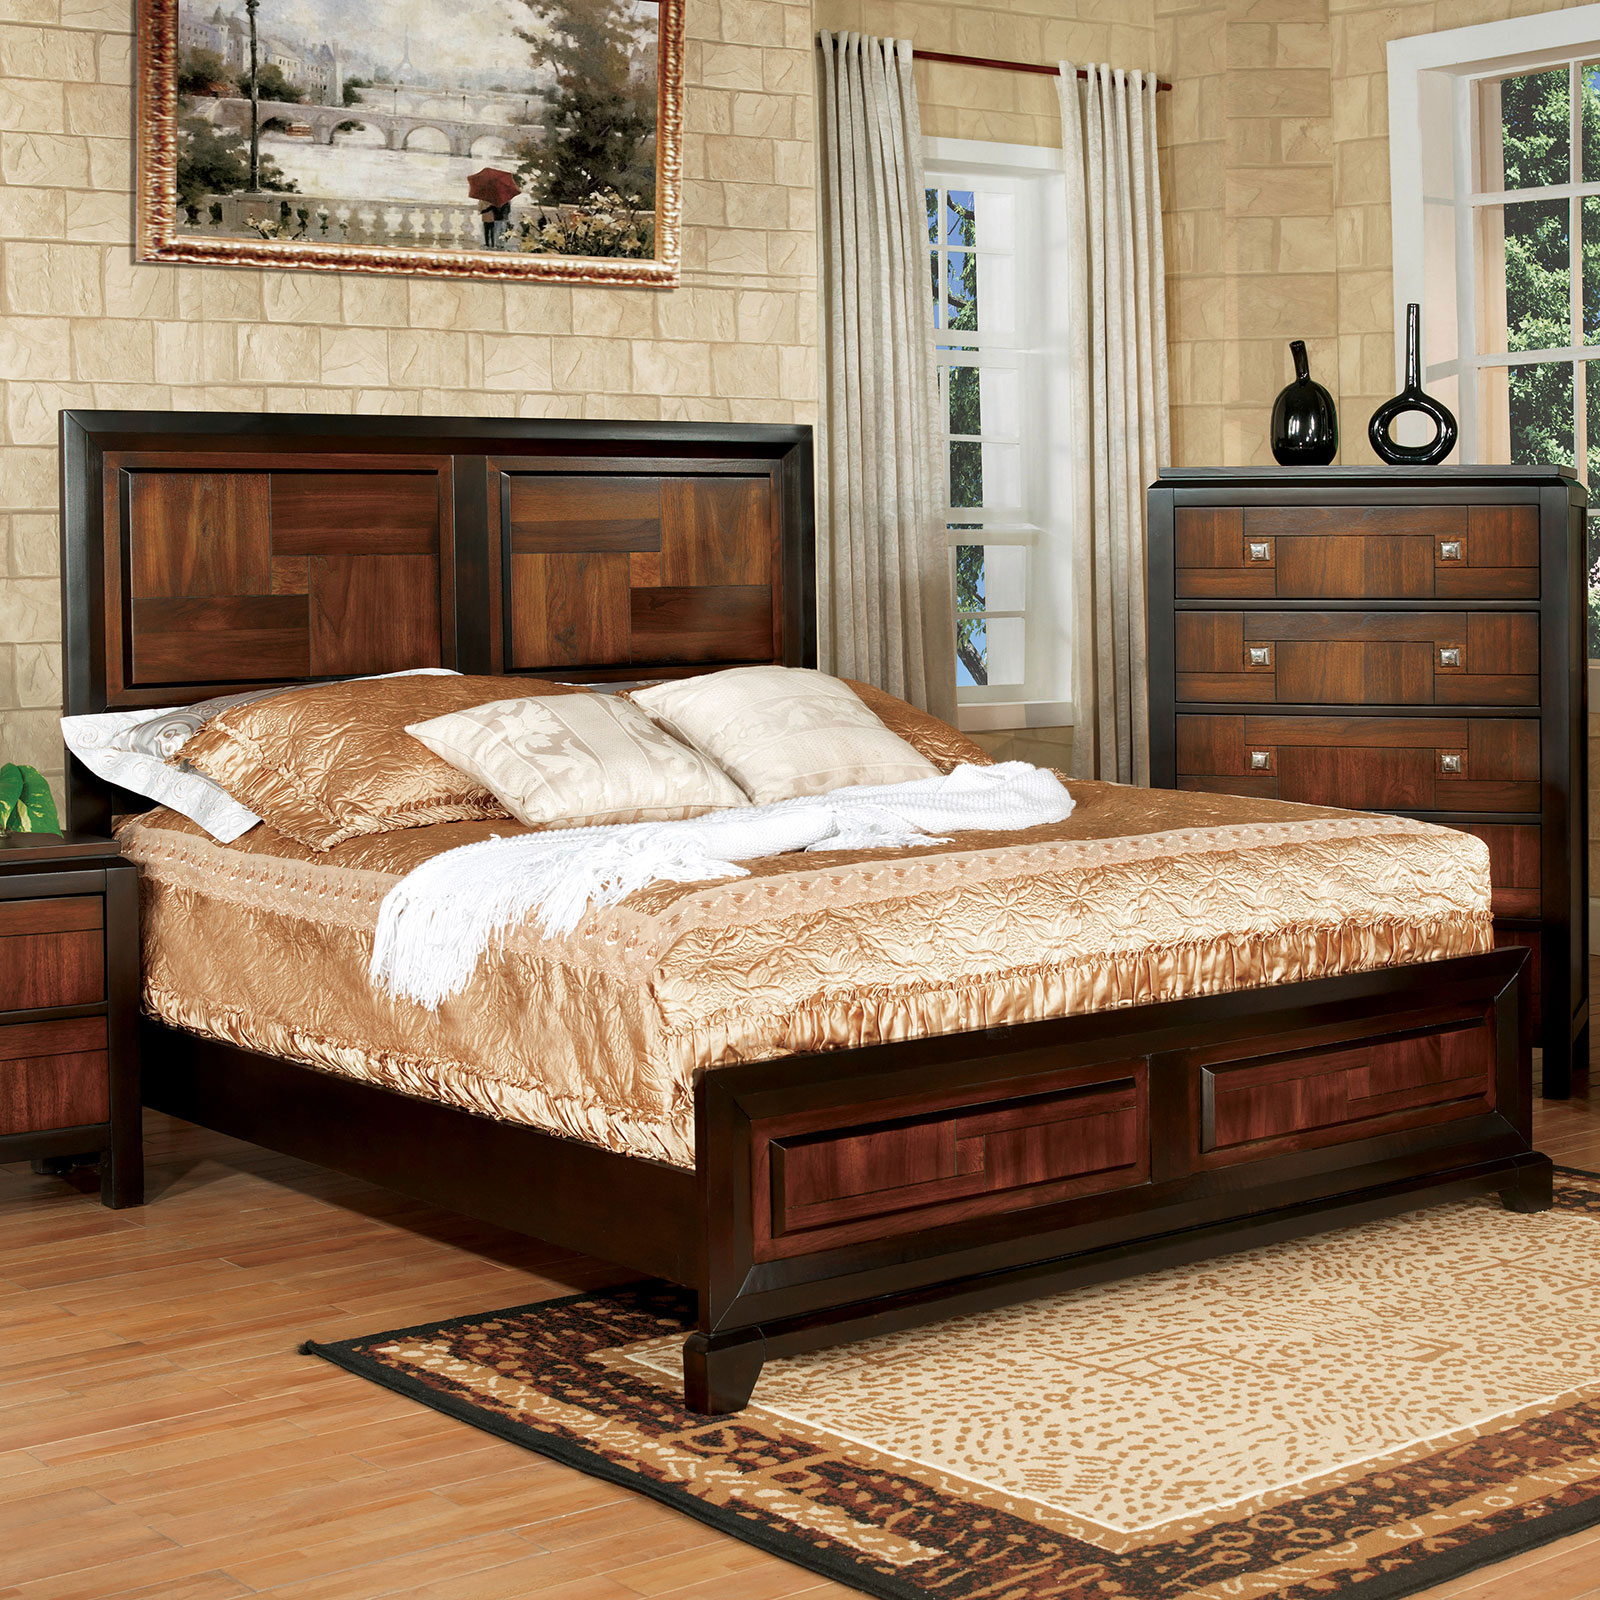 Esofastore Eastern King Size Bed Acacia Panel Headboard Footboard Unique Two Tone Walnut Finish Bedframe 1pc Bedroom Furniture Bed